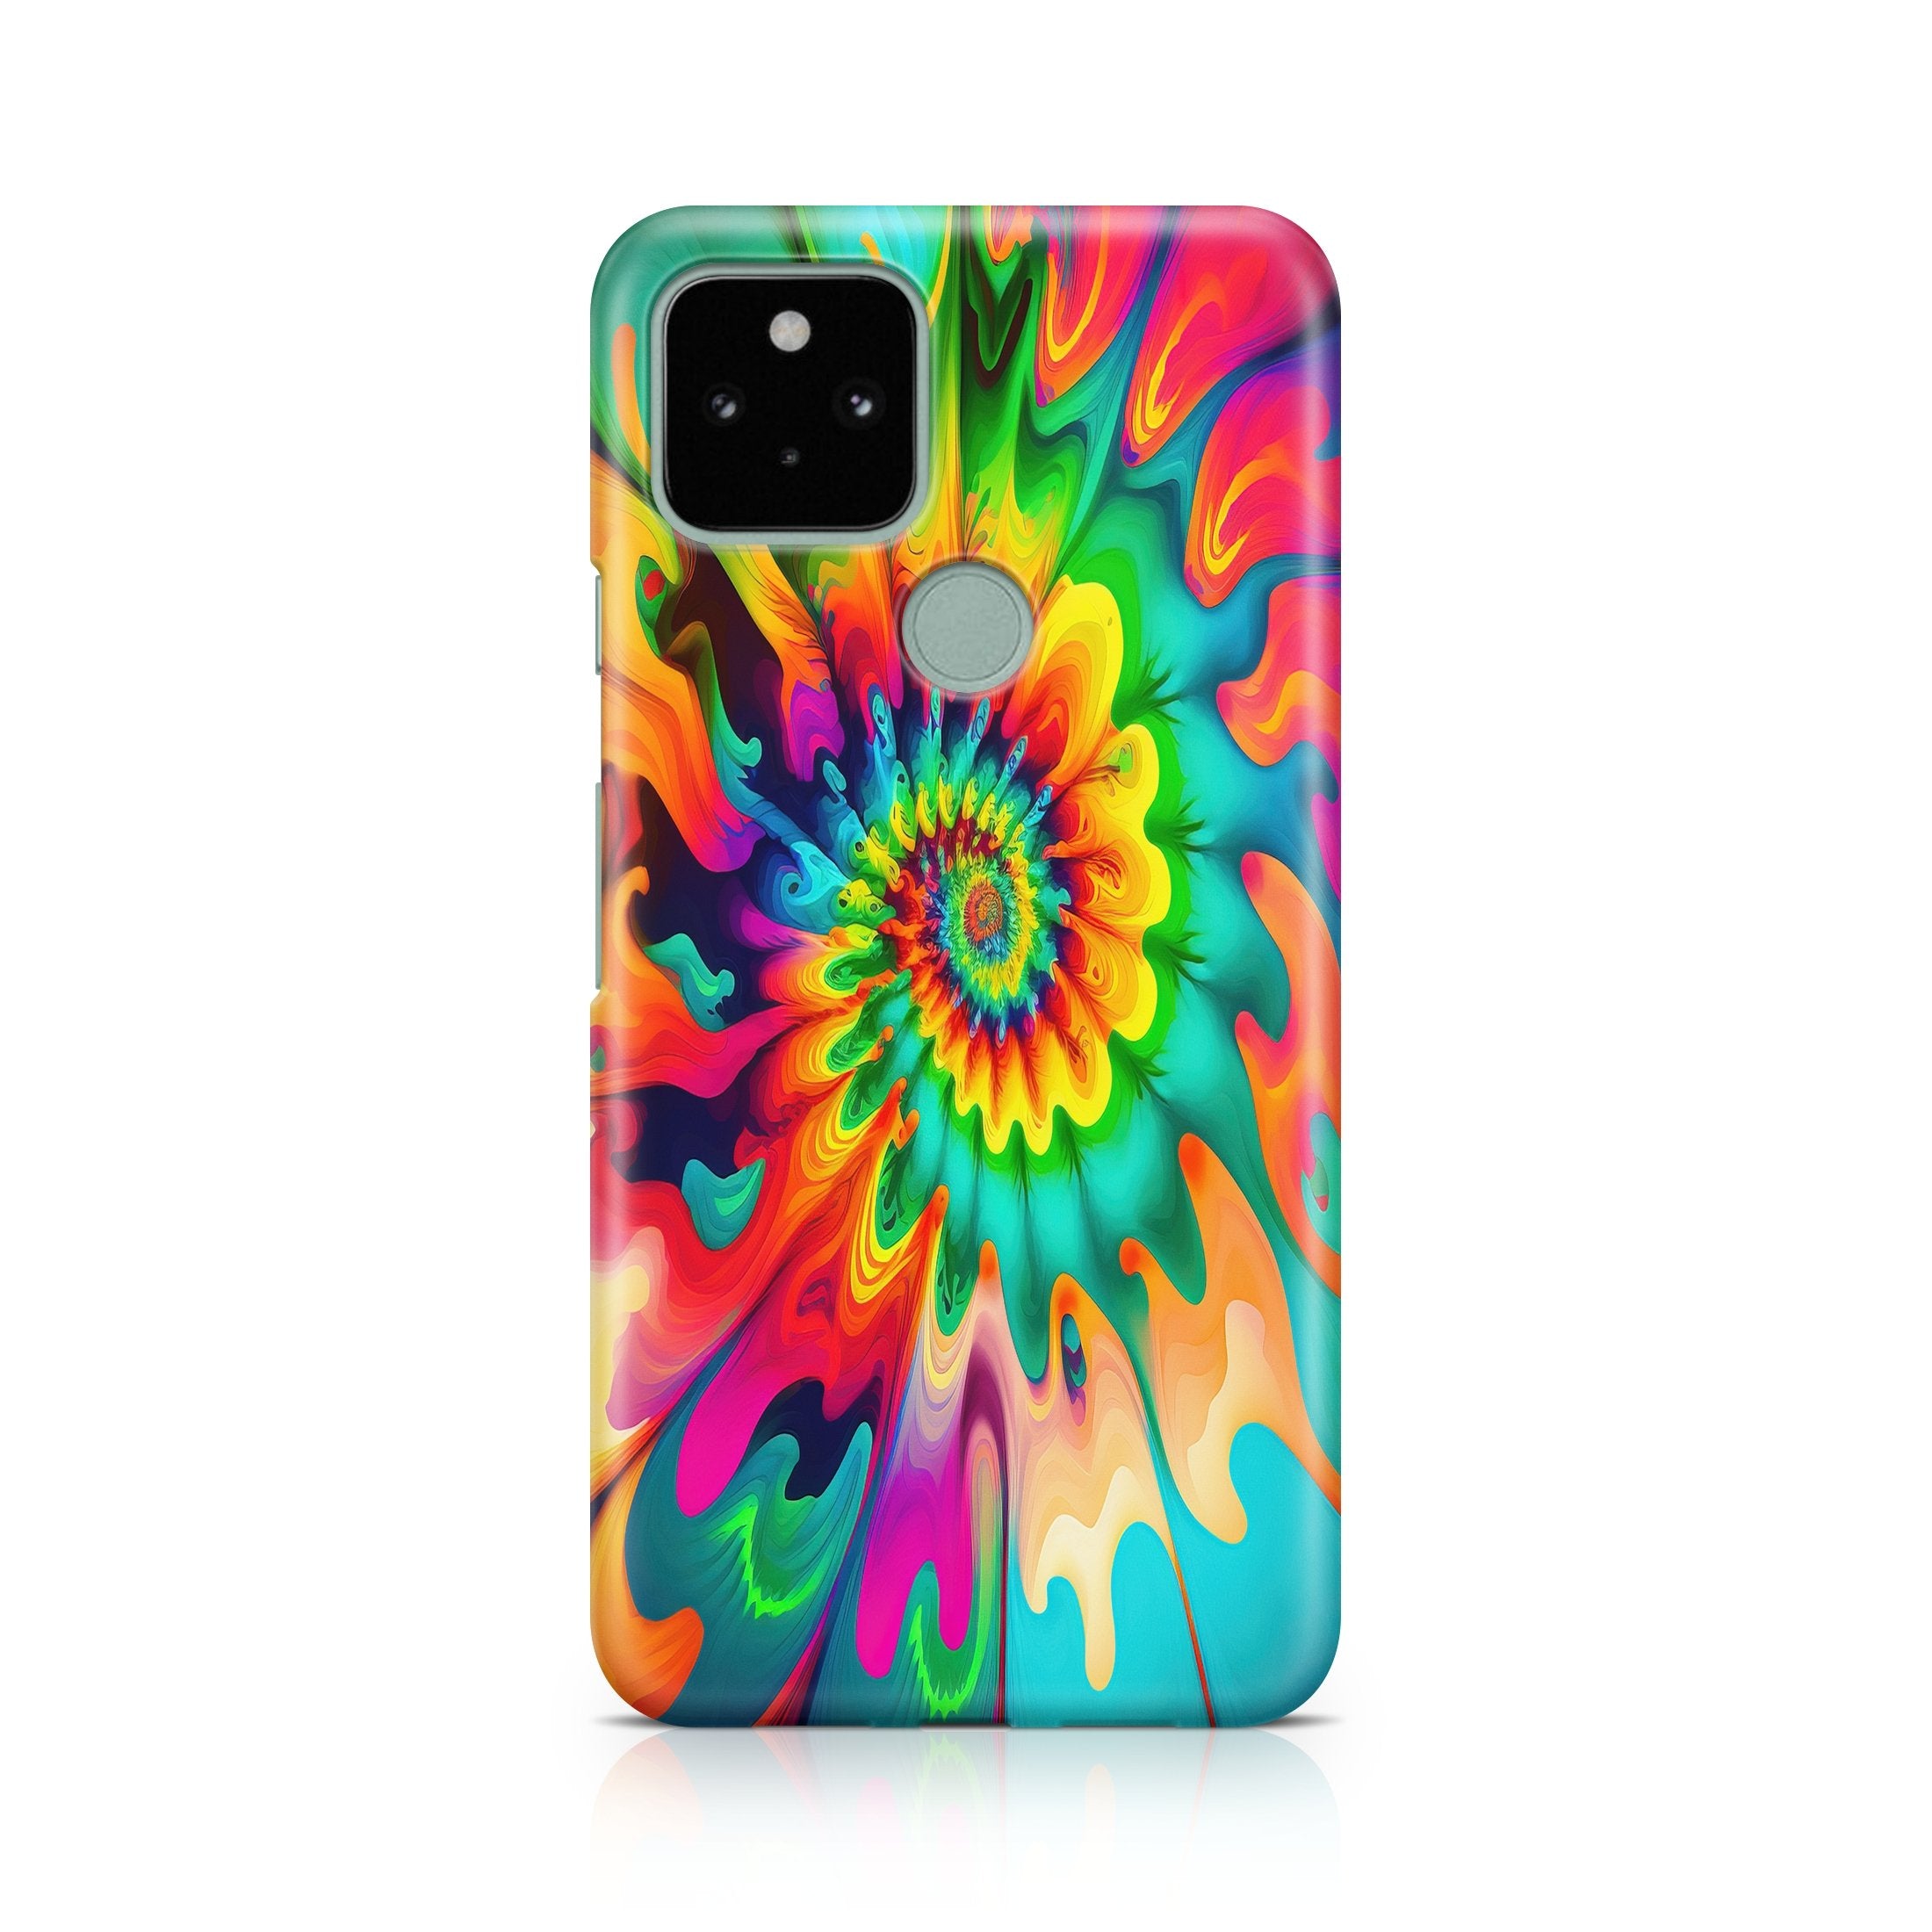 Psychedelic Tie Dye - Google phone case designs by CaseSwagger